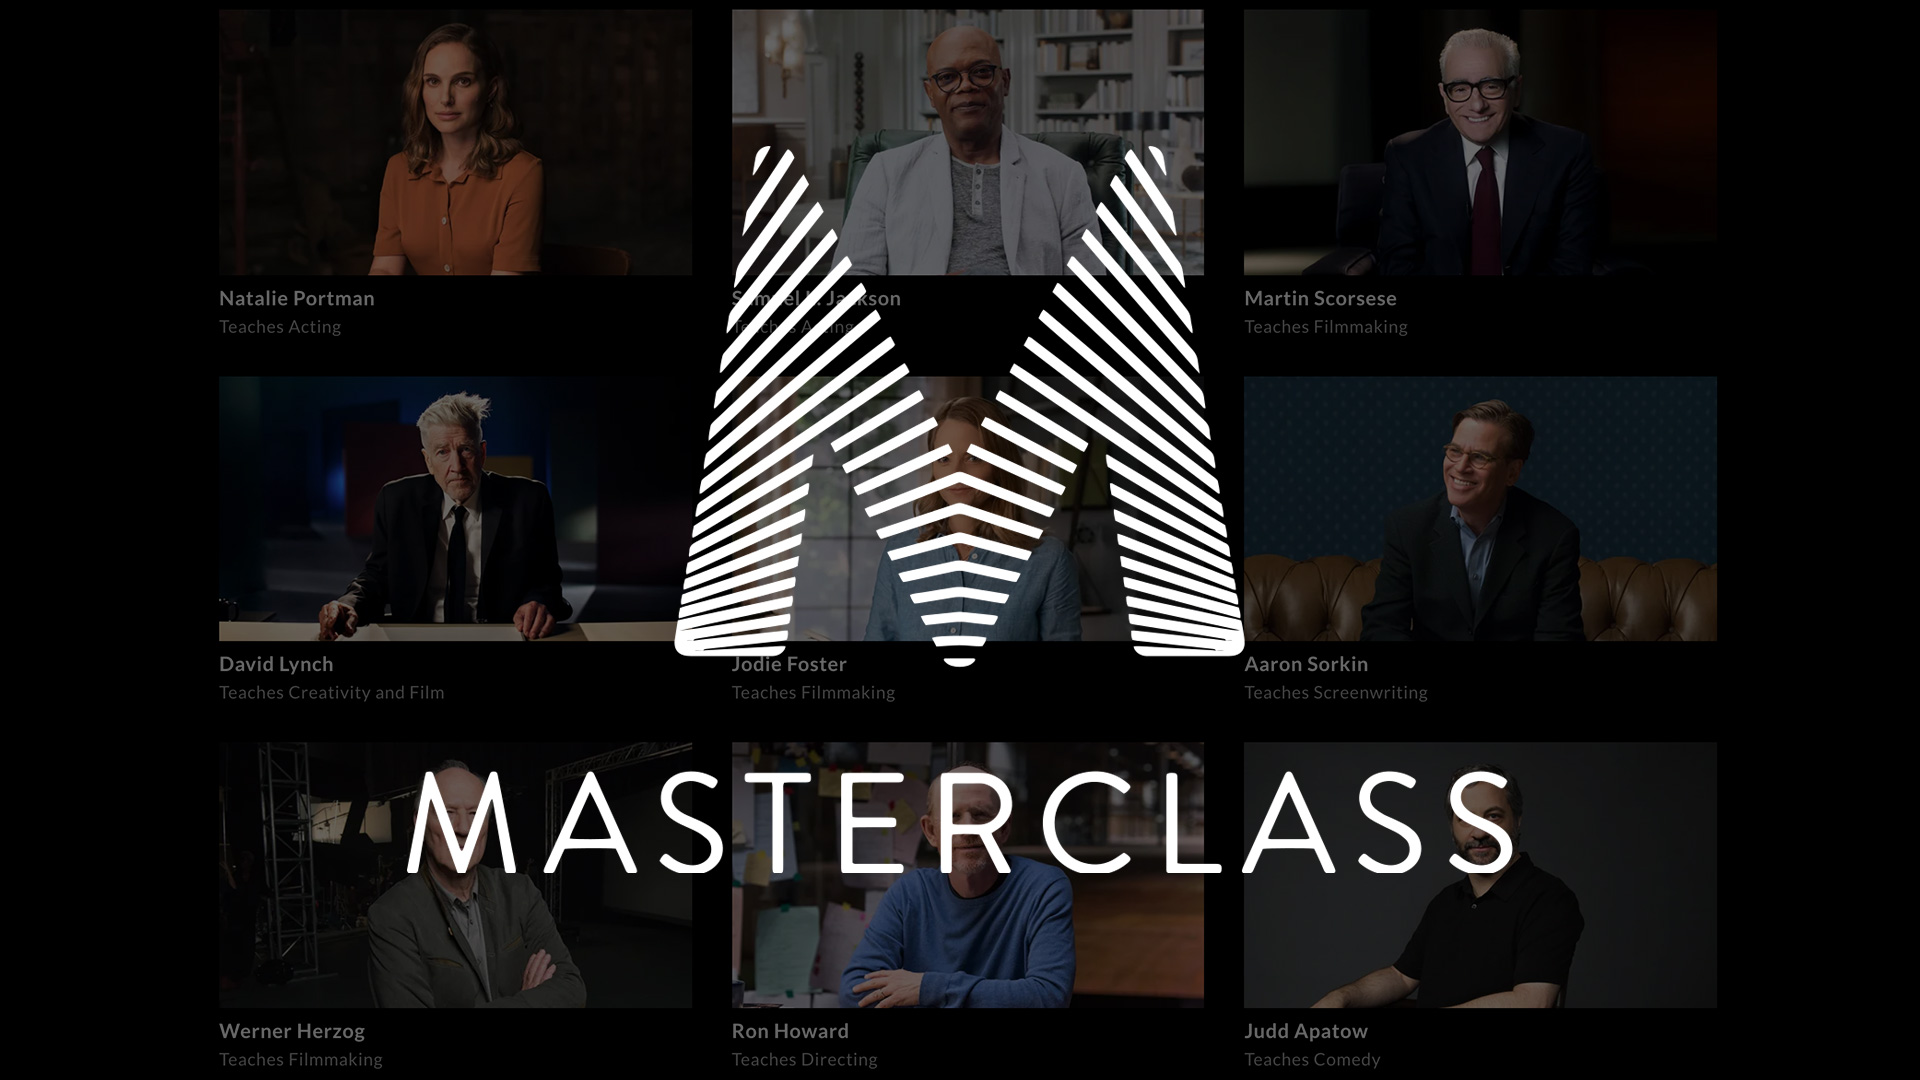 MasterClass Review: Is It Worth the Price?